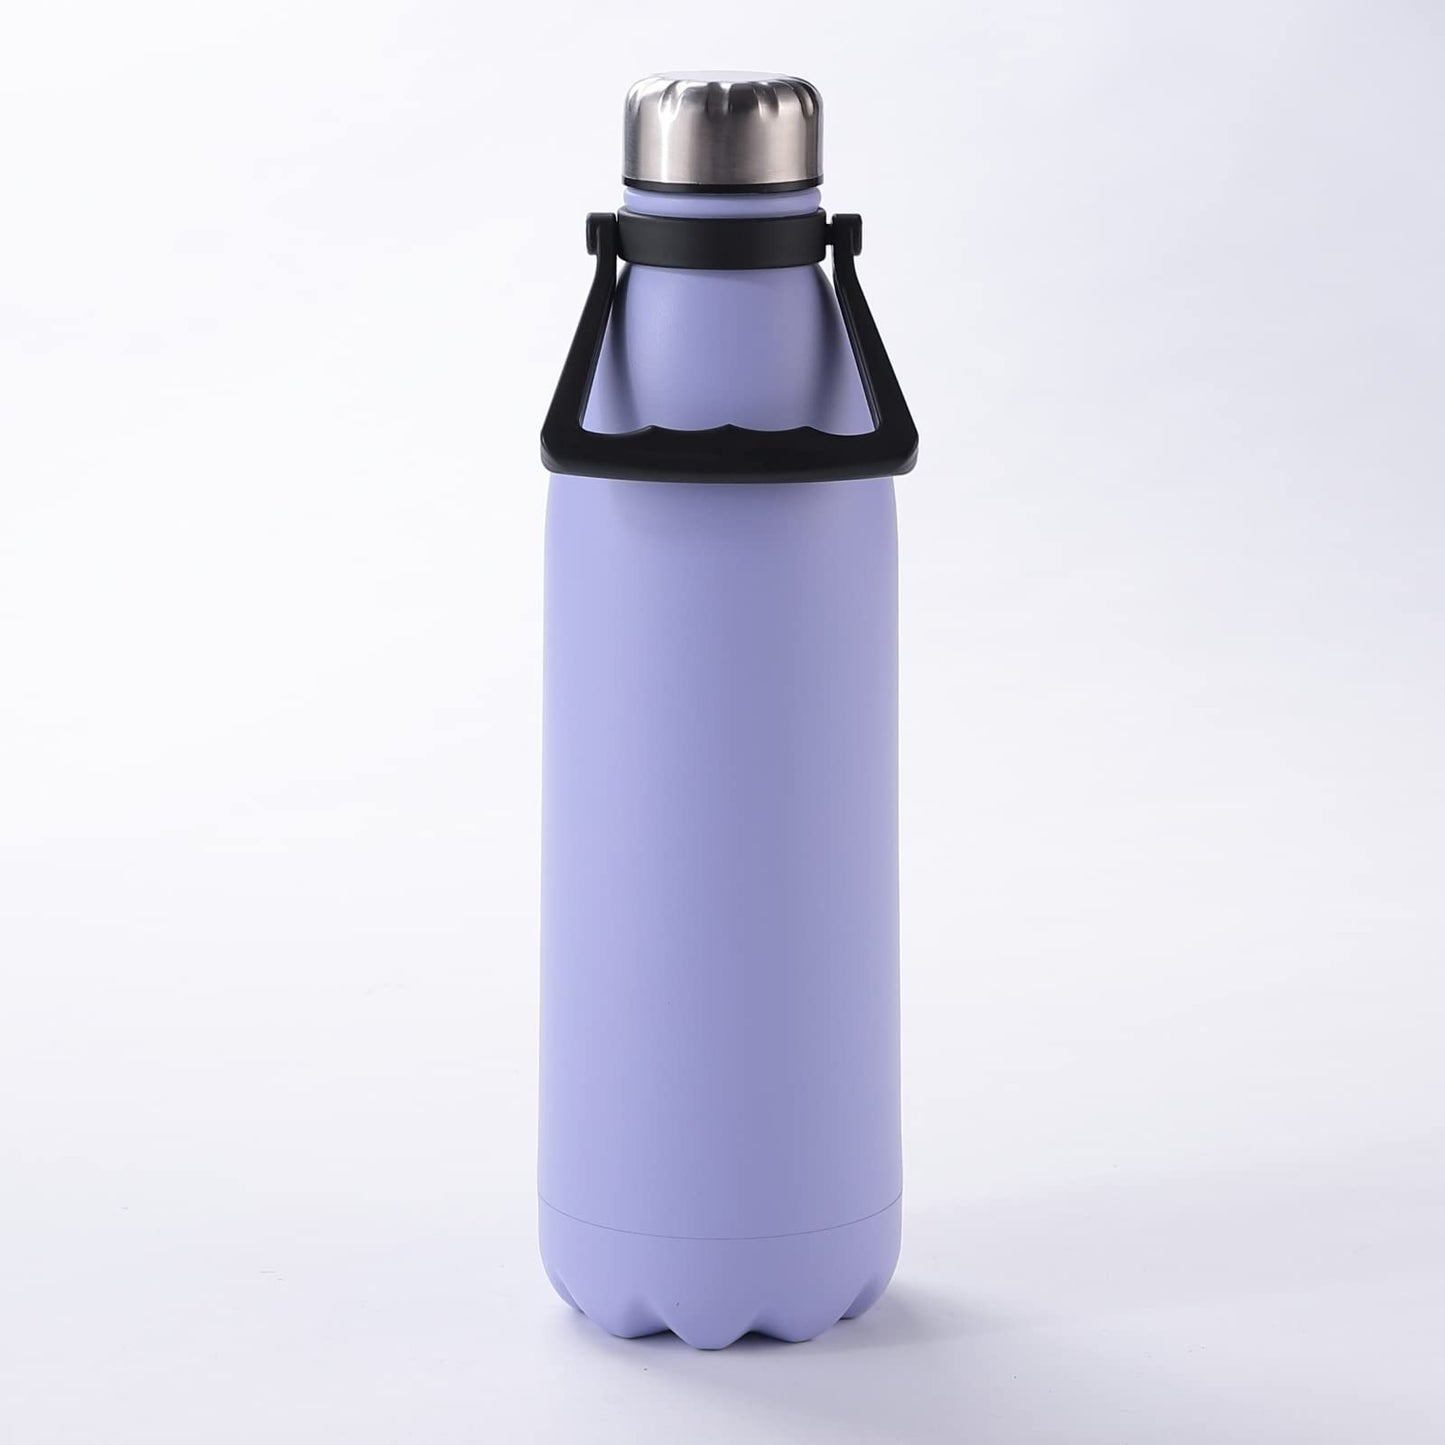 The Better Home 2L Insulated Bottle, 304 Stainless Steel, Hot 18 Hrs, Cold 24 Hrs, Rustproof, Leakproof, Purple.